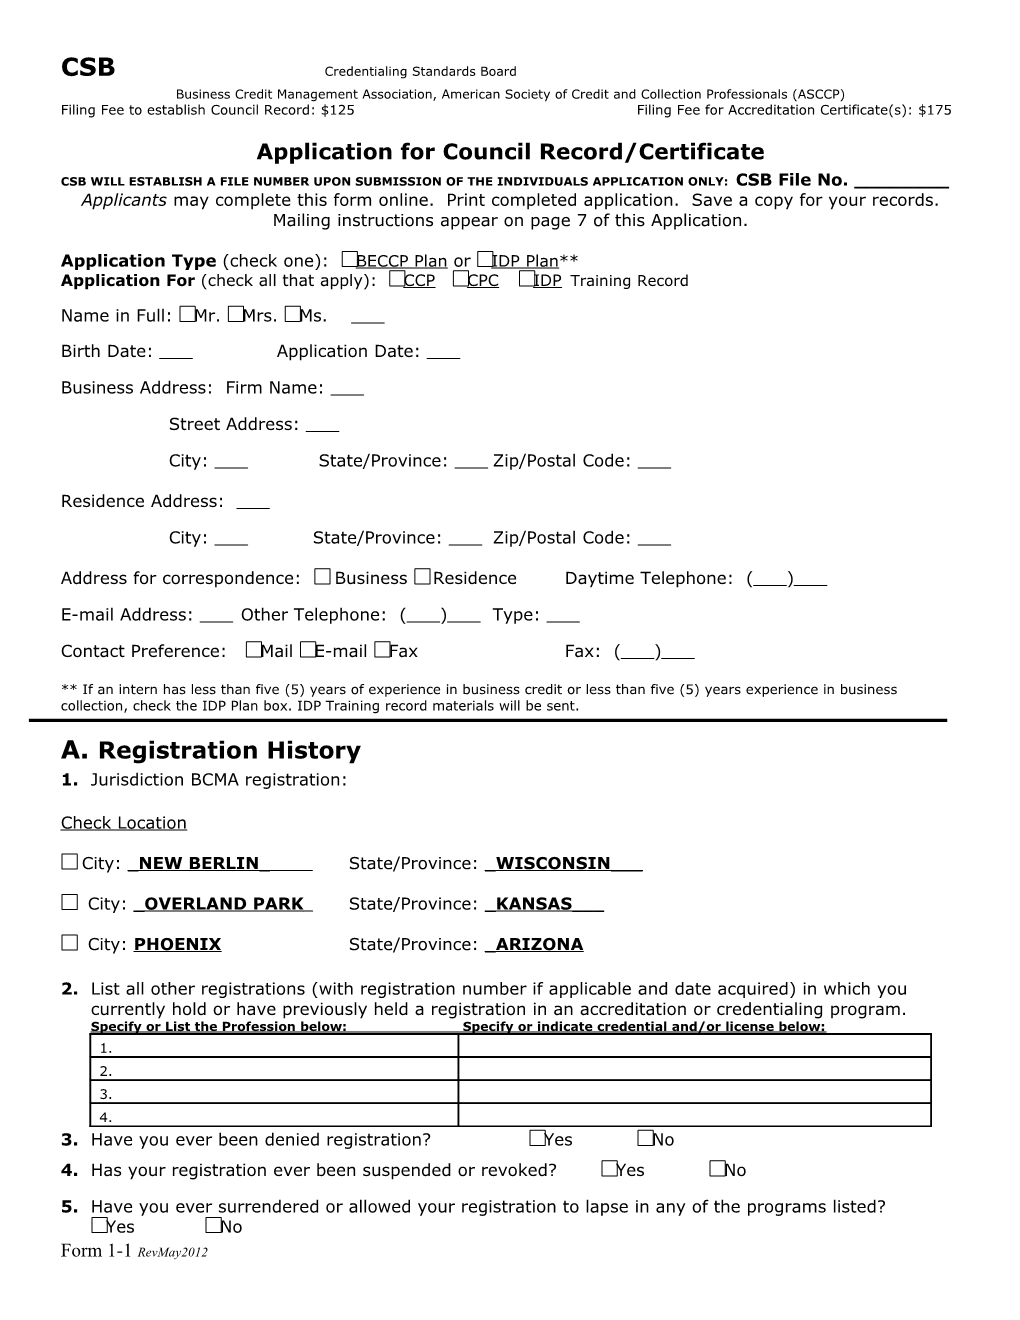 Application for Council Record/Certificate